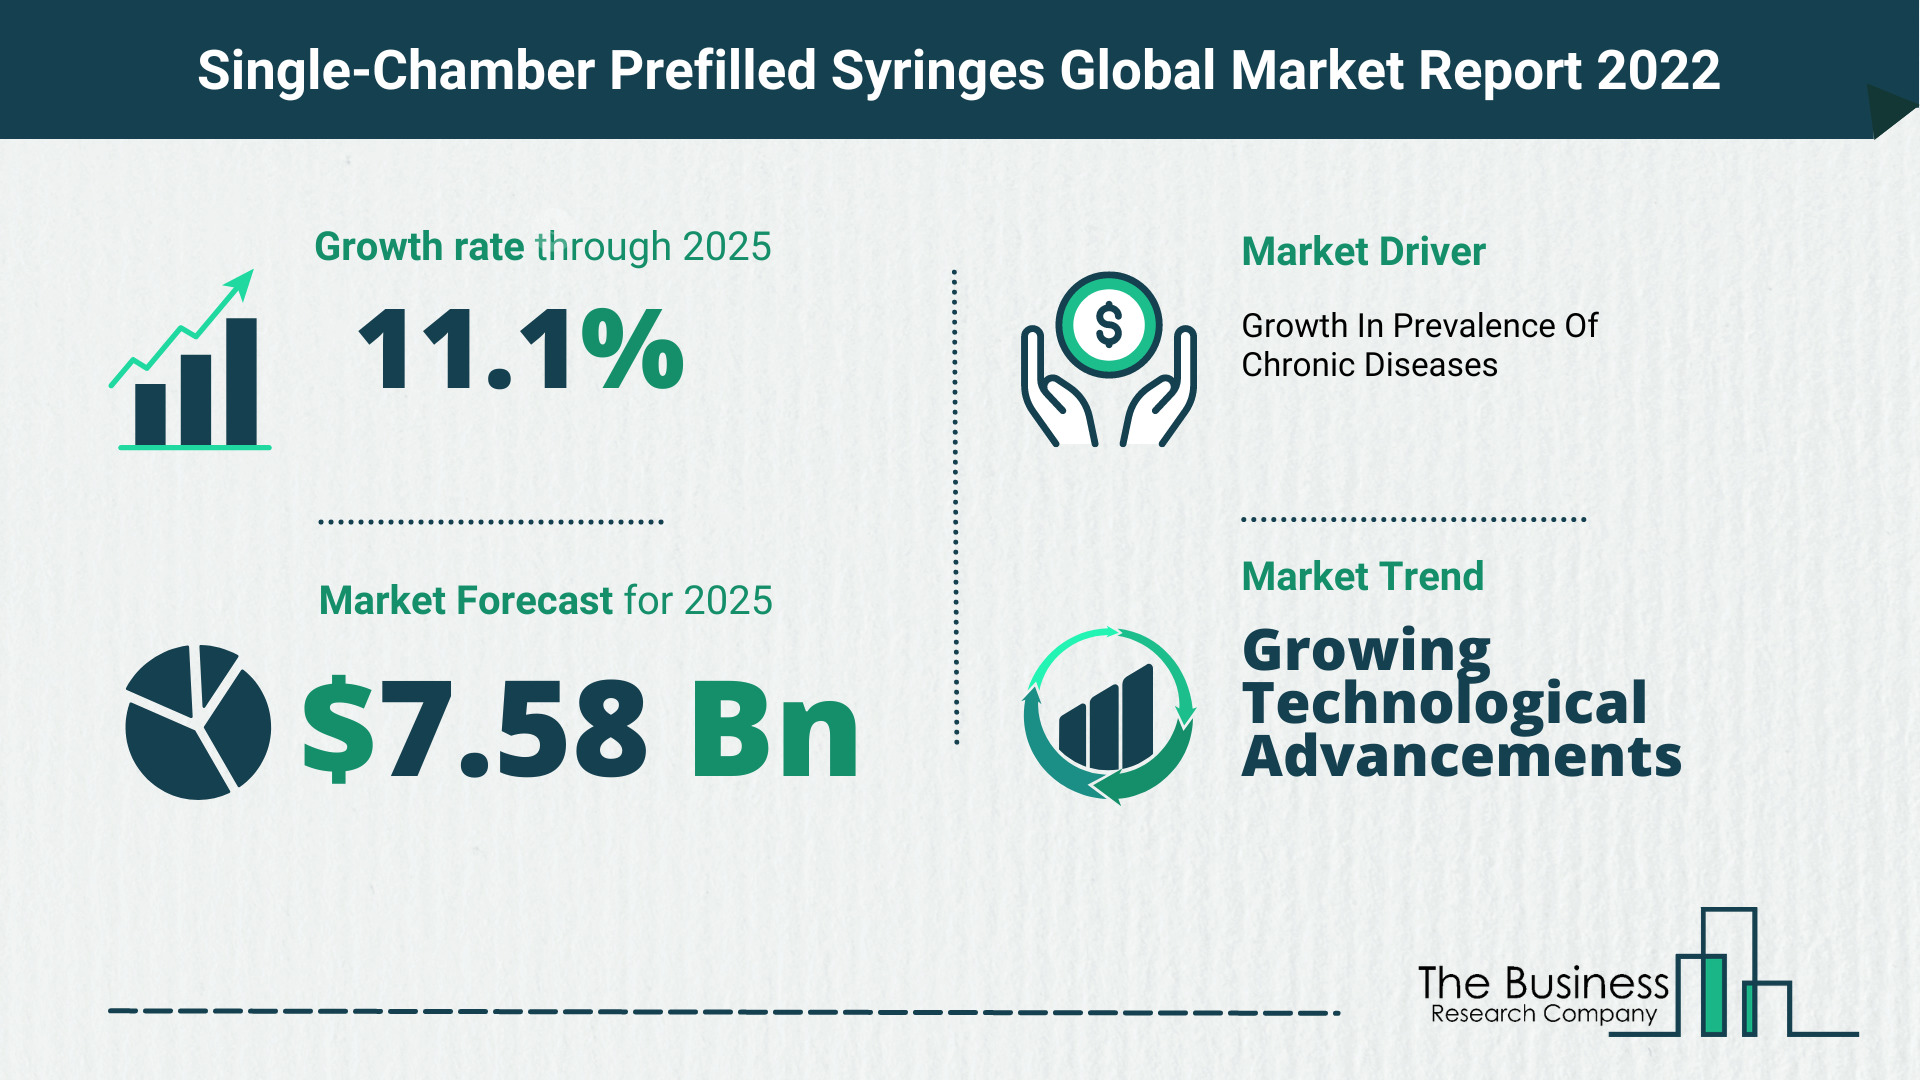 What Is The Single-Chamber Prefilled Syringes Market Overview In 2022?